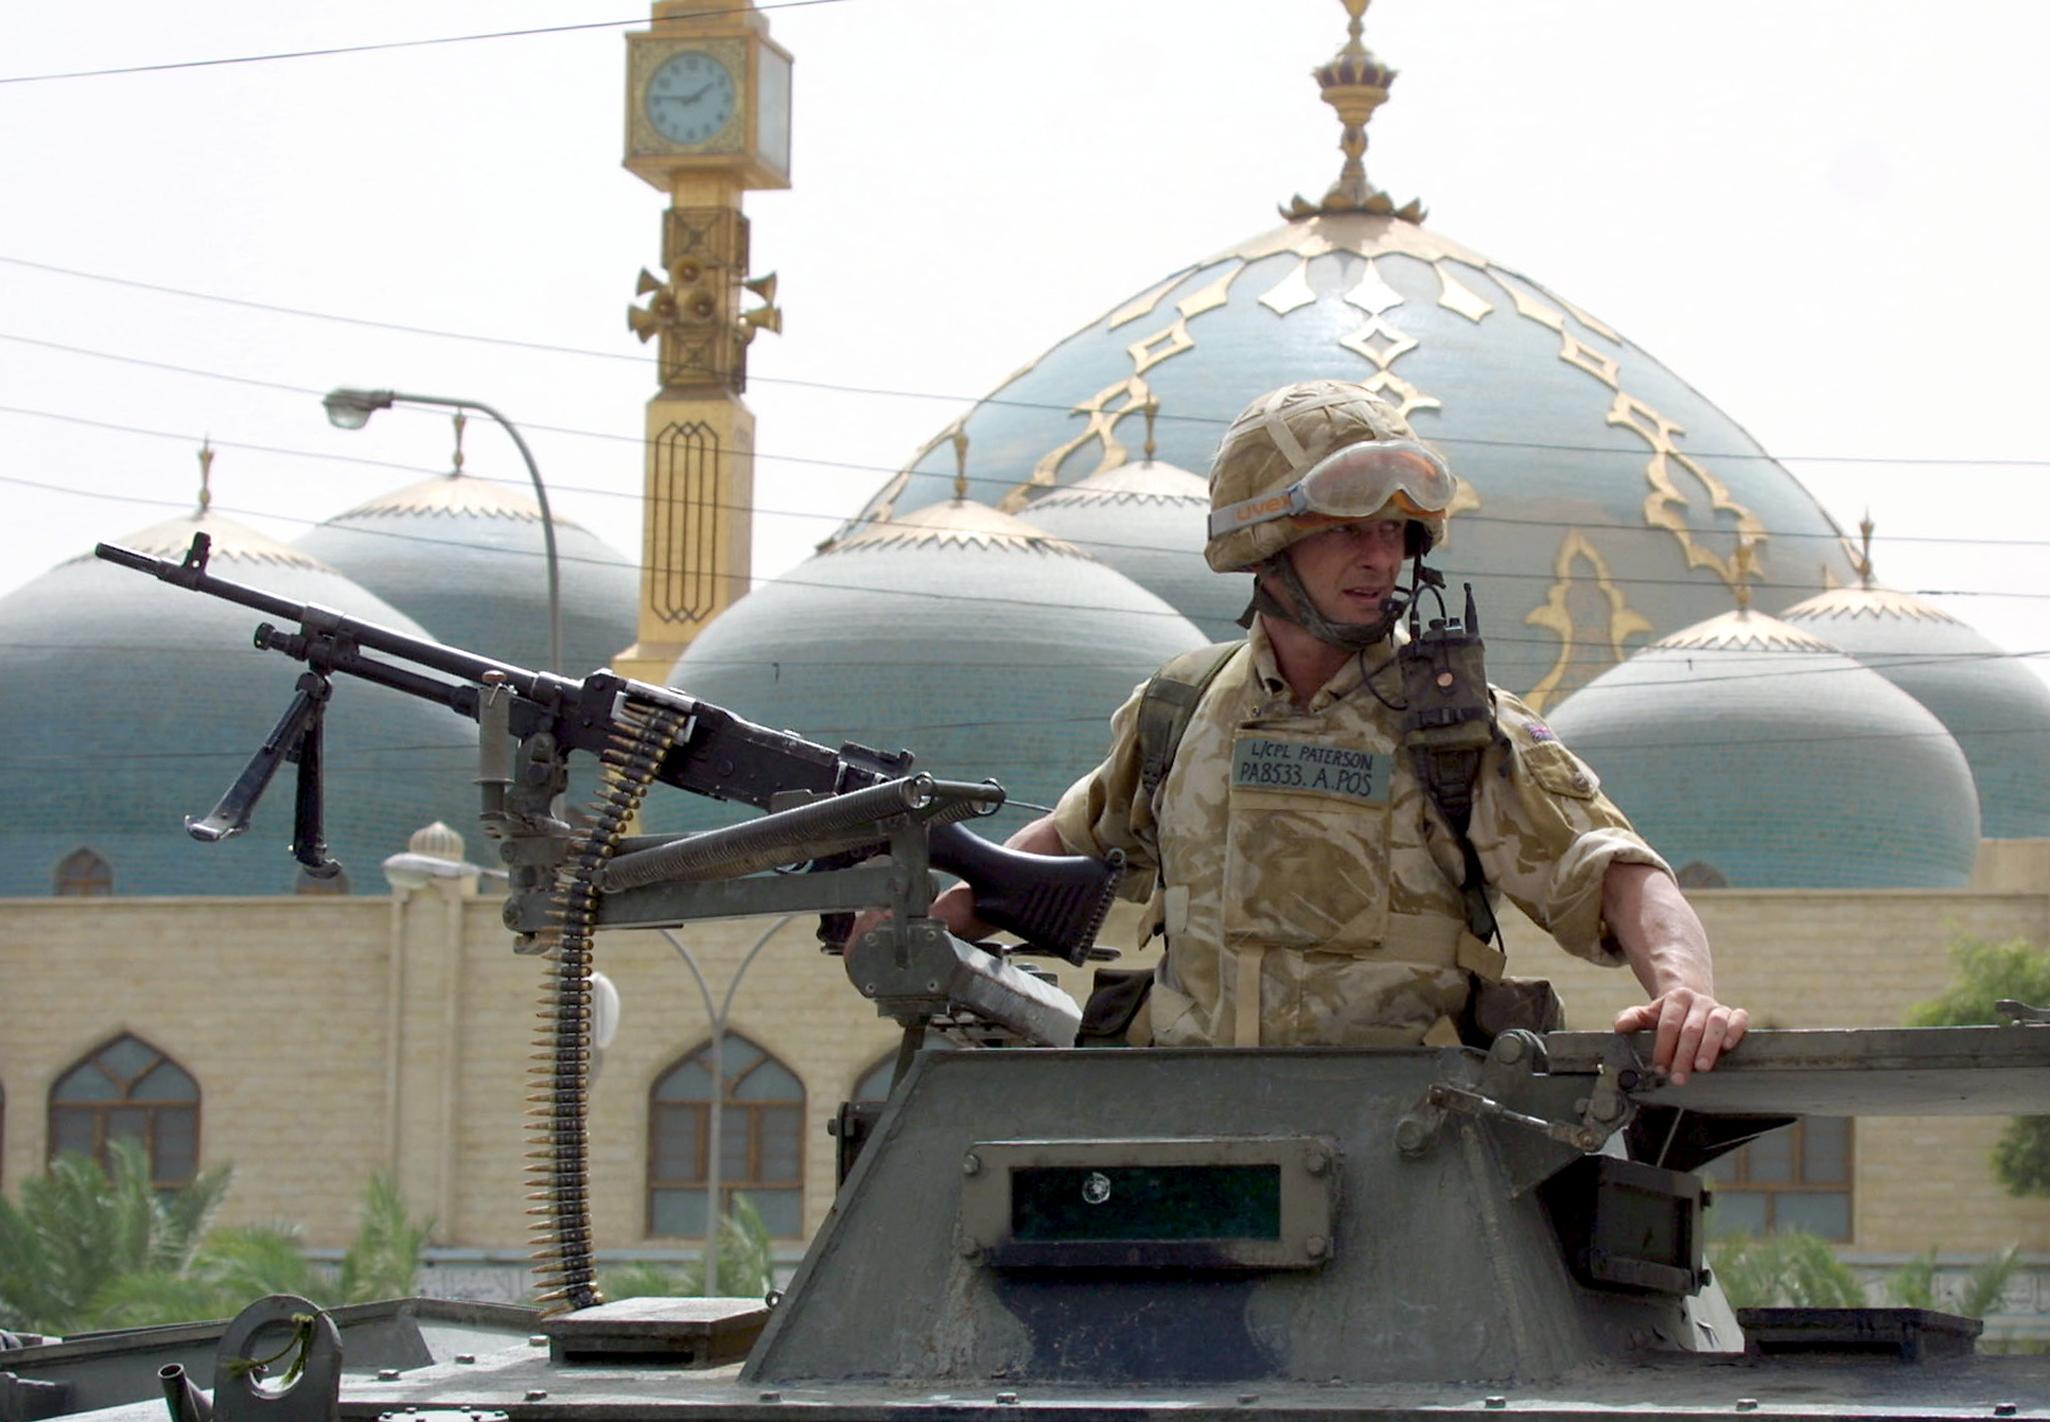 A British soldier patrols a street in front of a mosque in the southern Iraqi city of Basra on 13 September, 2003